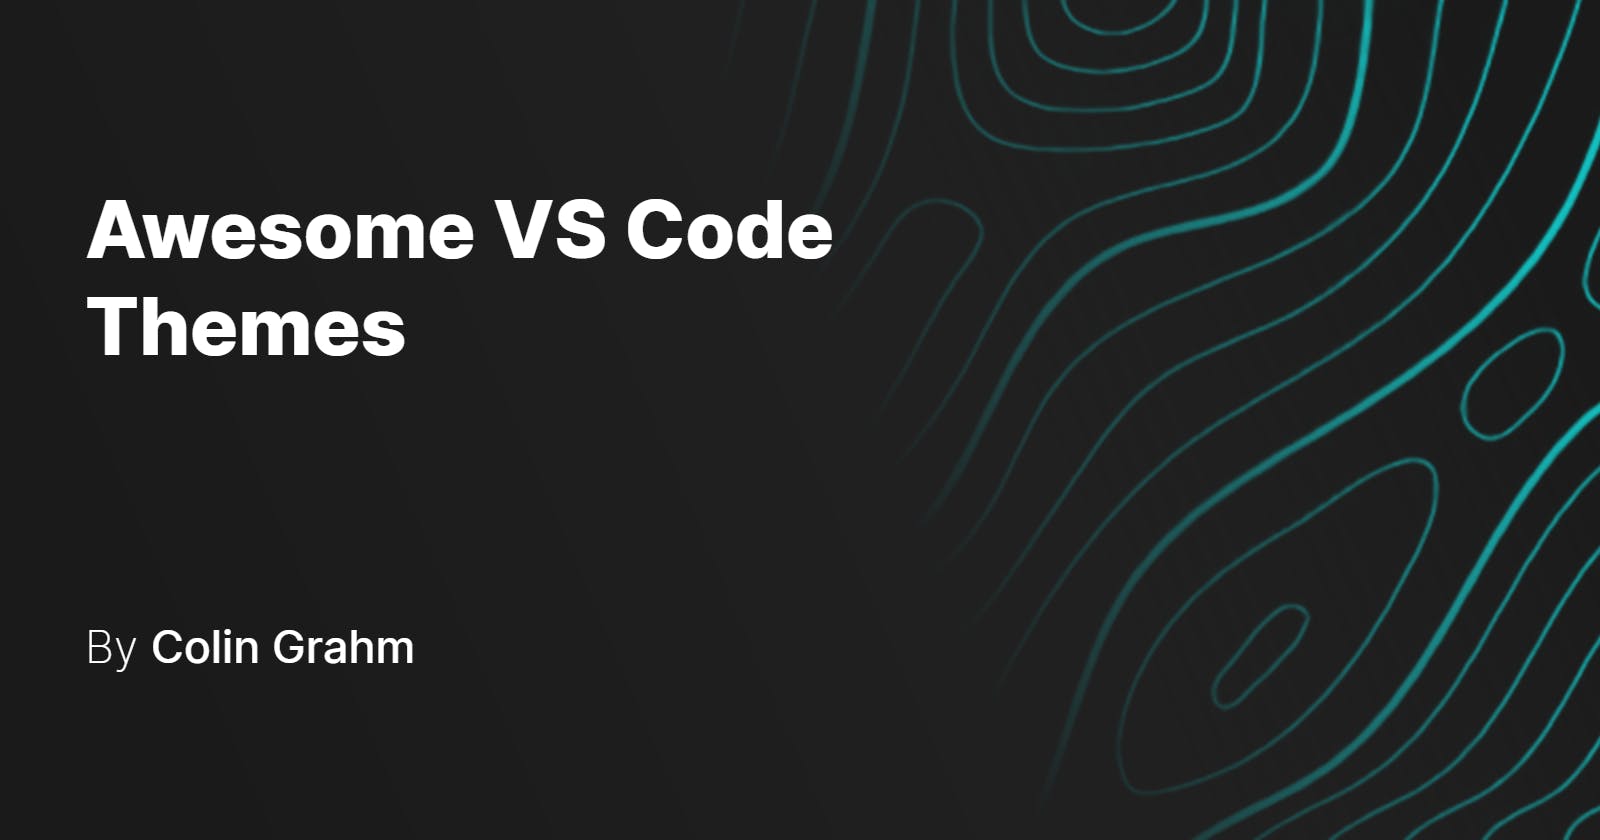 Awesome VS Code Themes